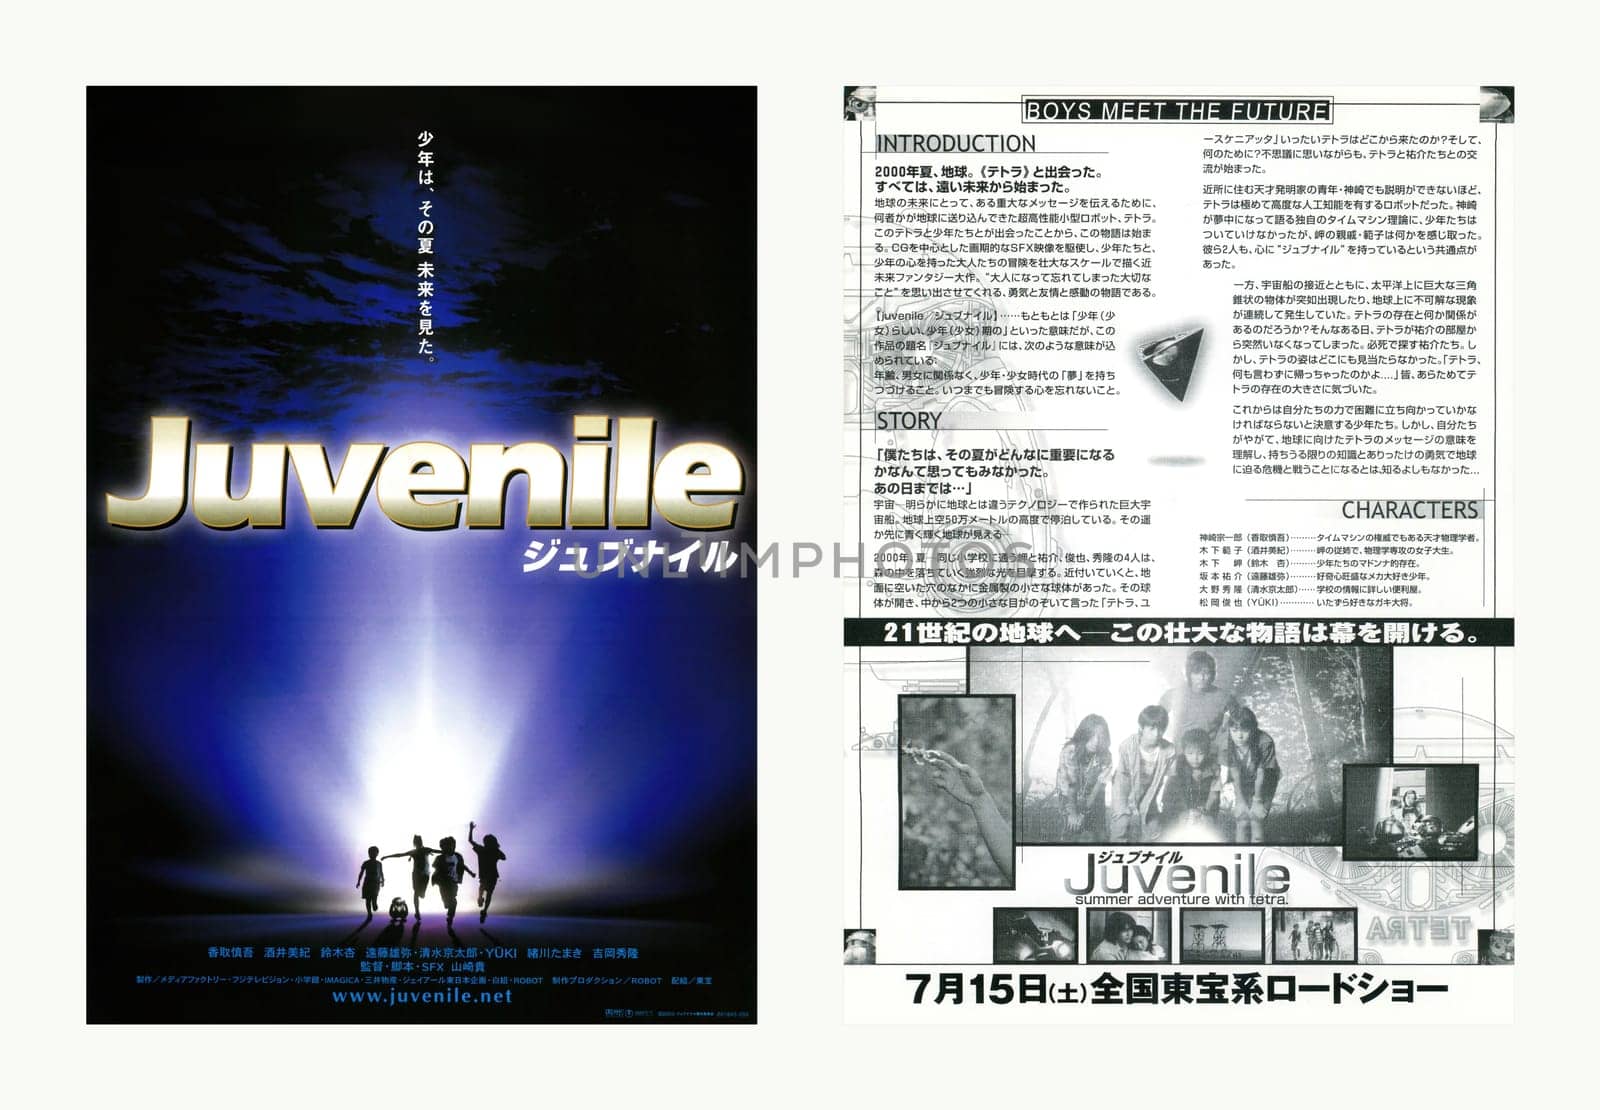 Leaflet inspired by Steven Spielberg for the 1st movie "Juvenile" by Japanese Takashi Yamazaki. by kuremo